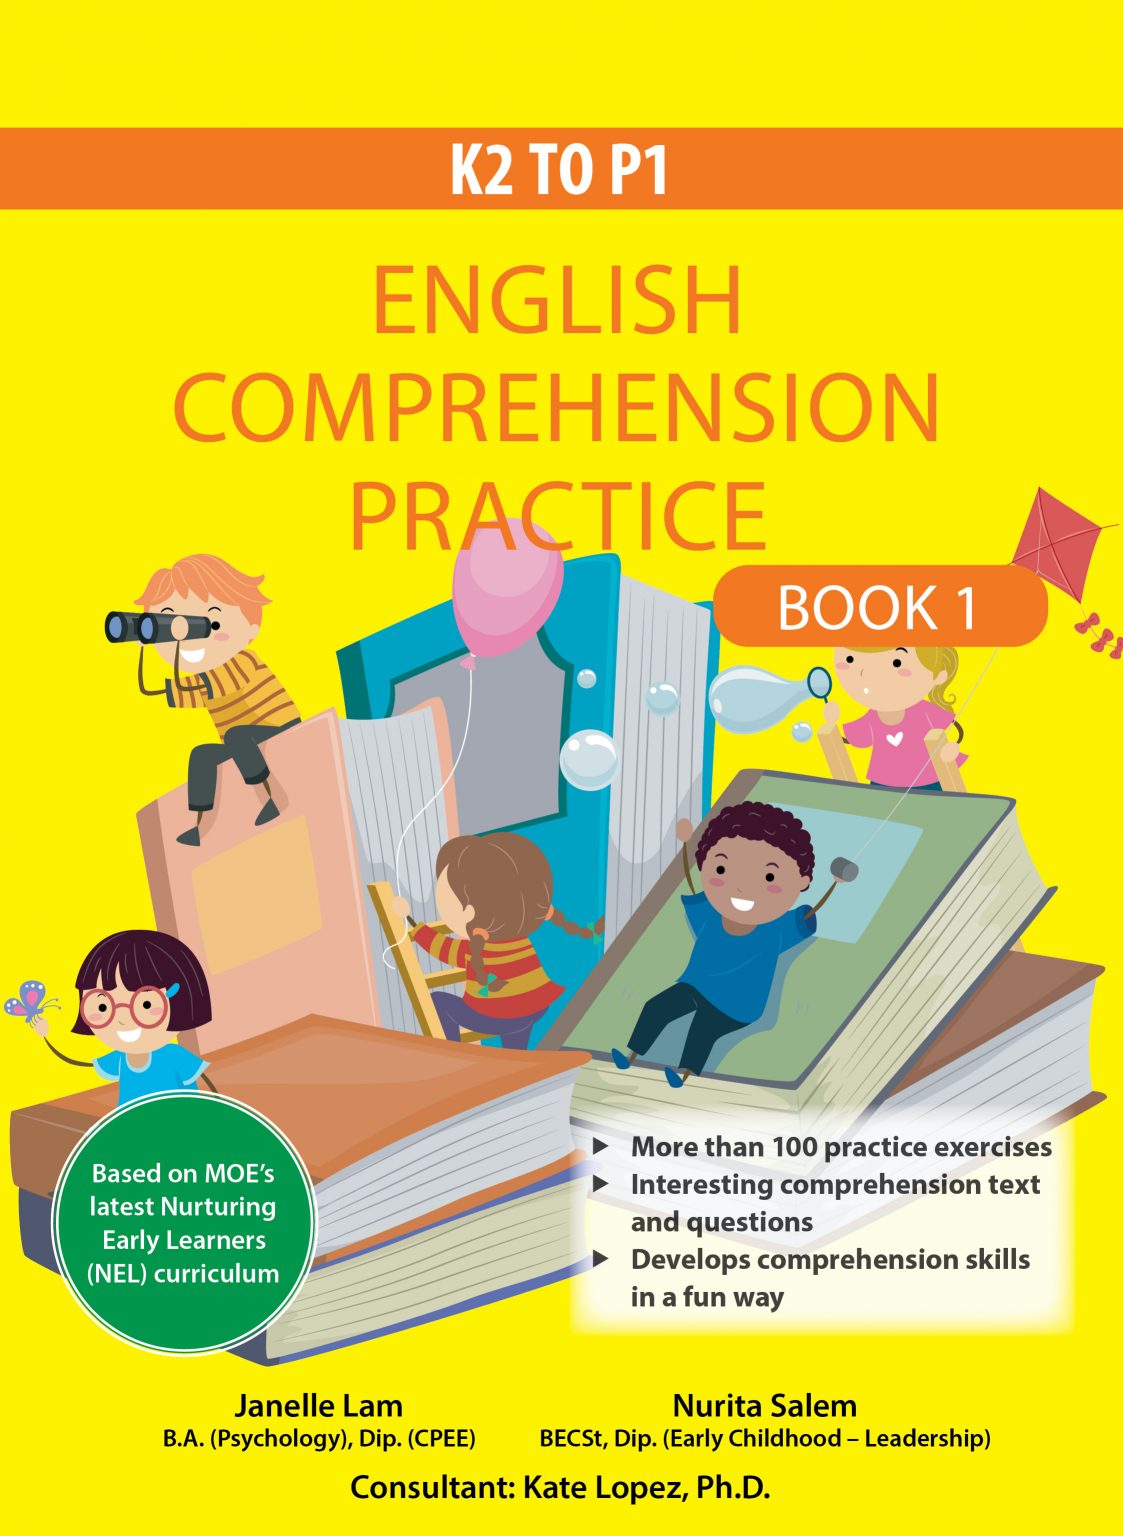 k2-to-p1-english-comprehension-practice-book-1-cpd-singapore-education-services-pte-ltd